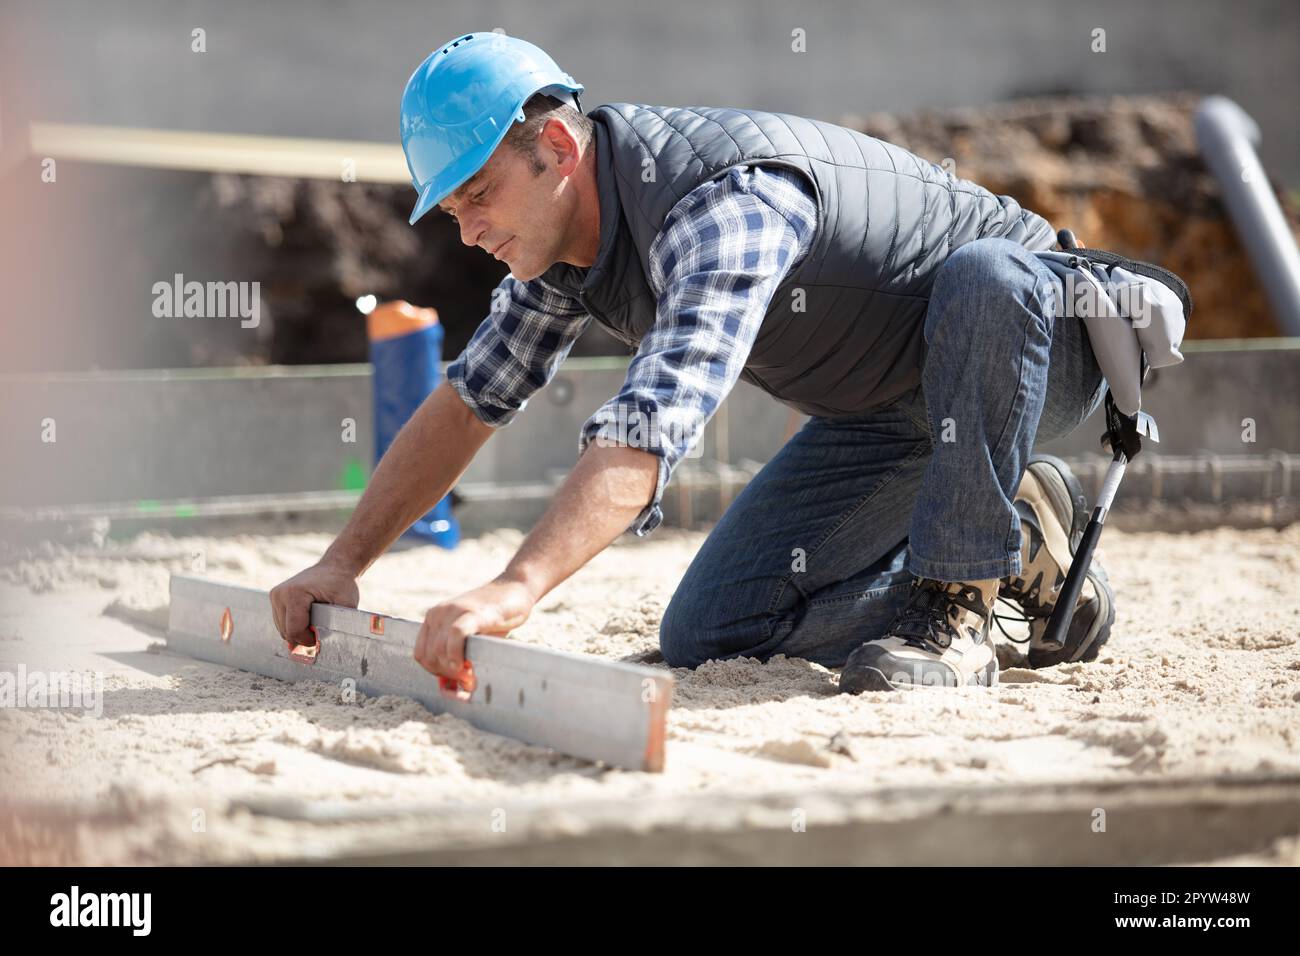 builder leveling floor at site Stock Photo